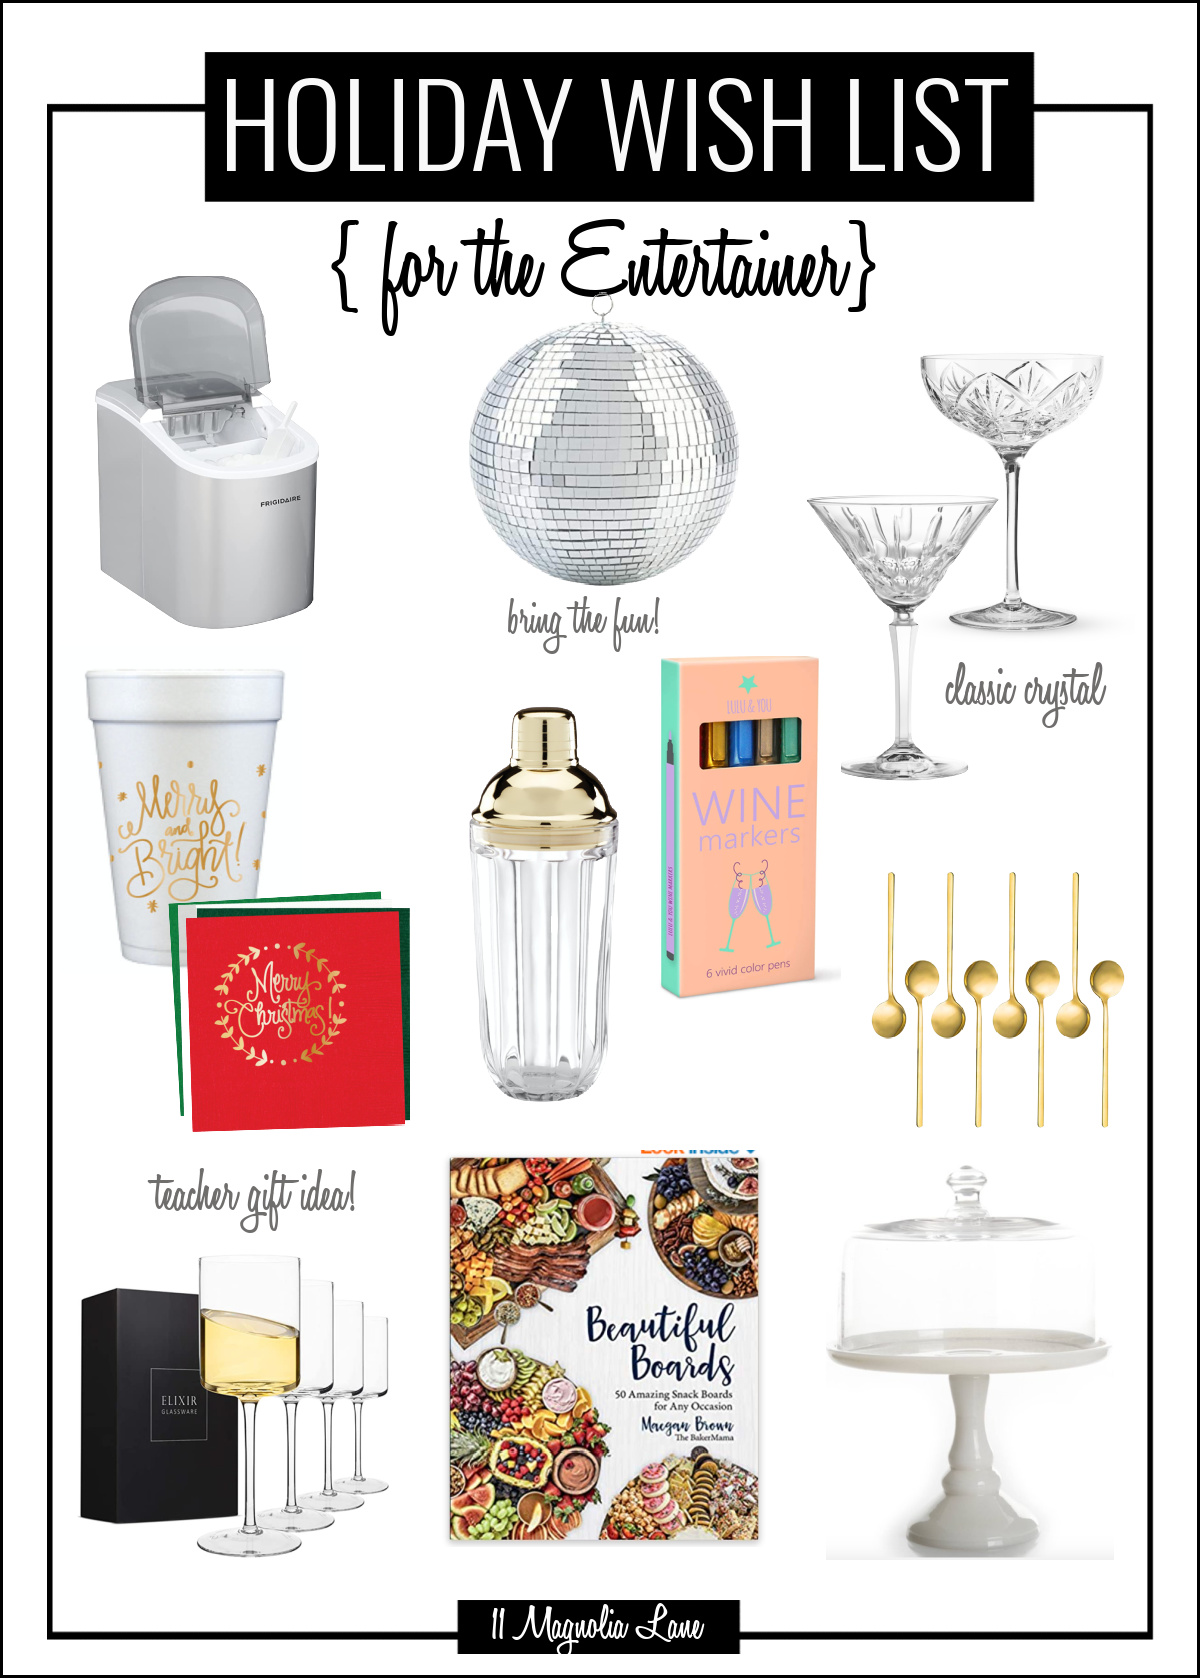 https://www.11magnolialane.com/wp-content/uploads/2021/11/Holiday-Wish-List-Gift-Guide-The-Entertainer.jpg